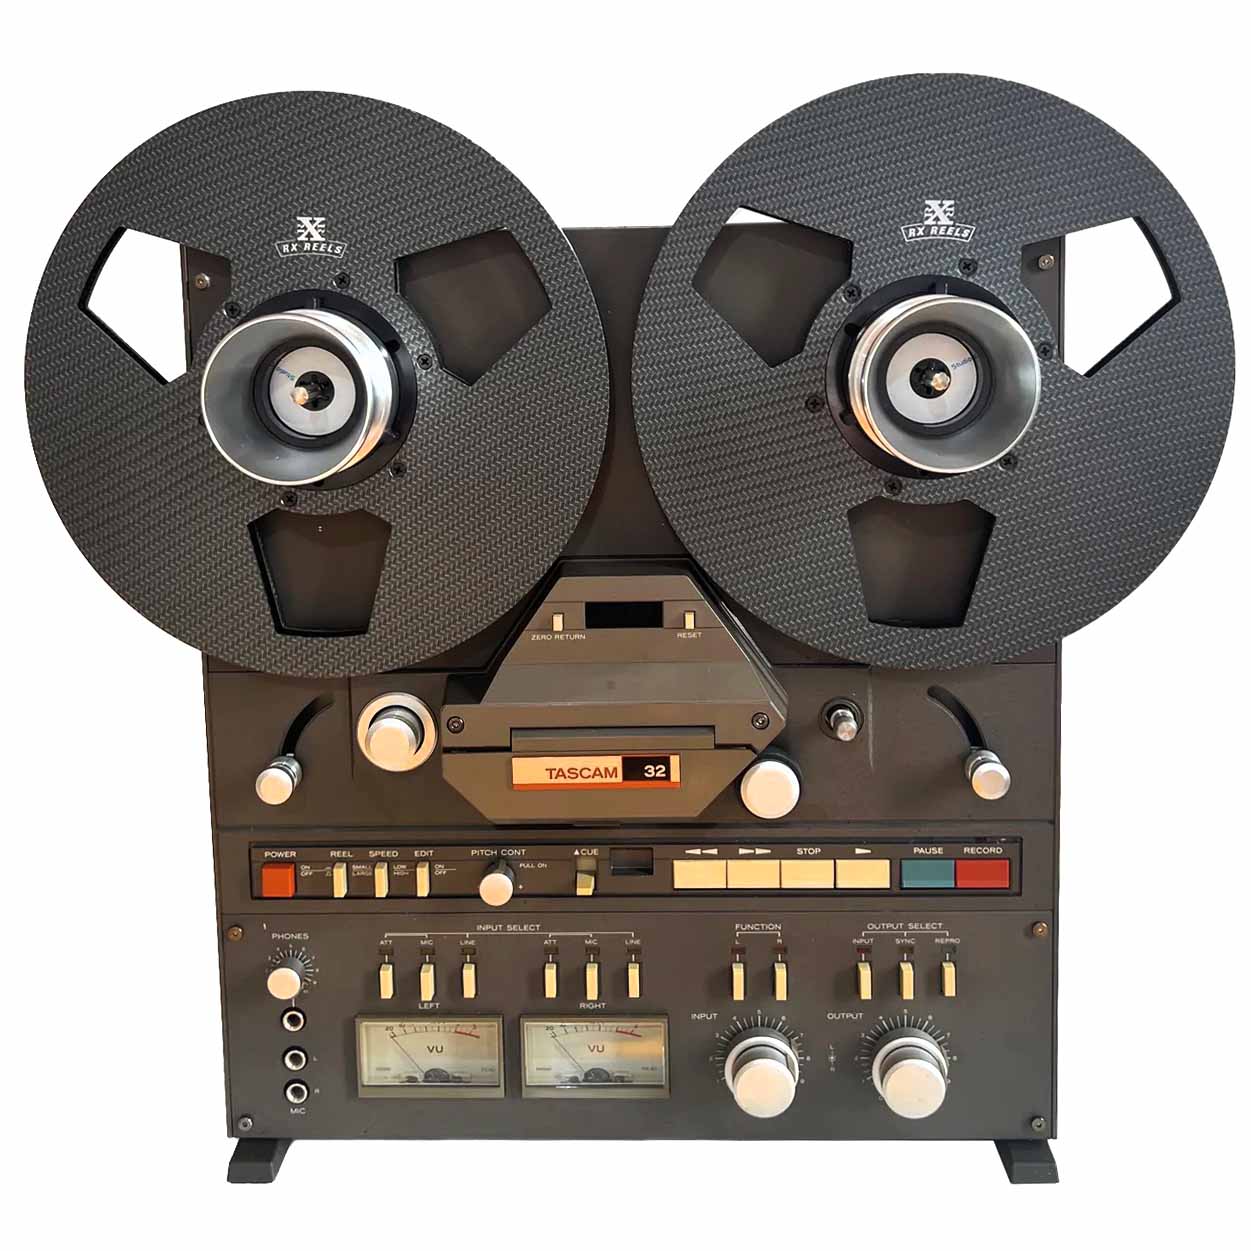 Can you still buy a reel to reel player to listen to old tapes